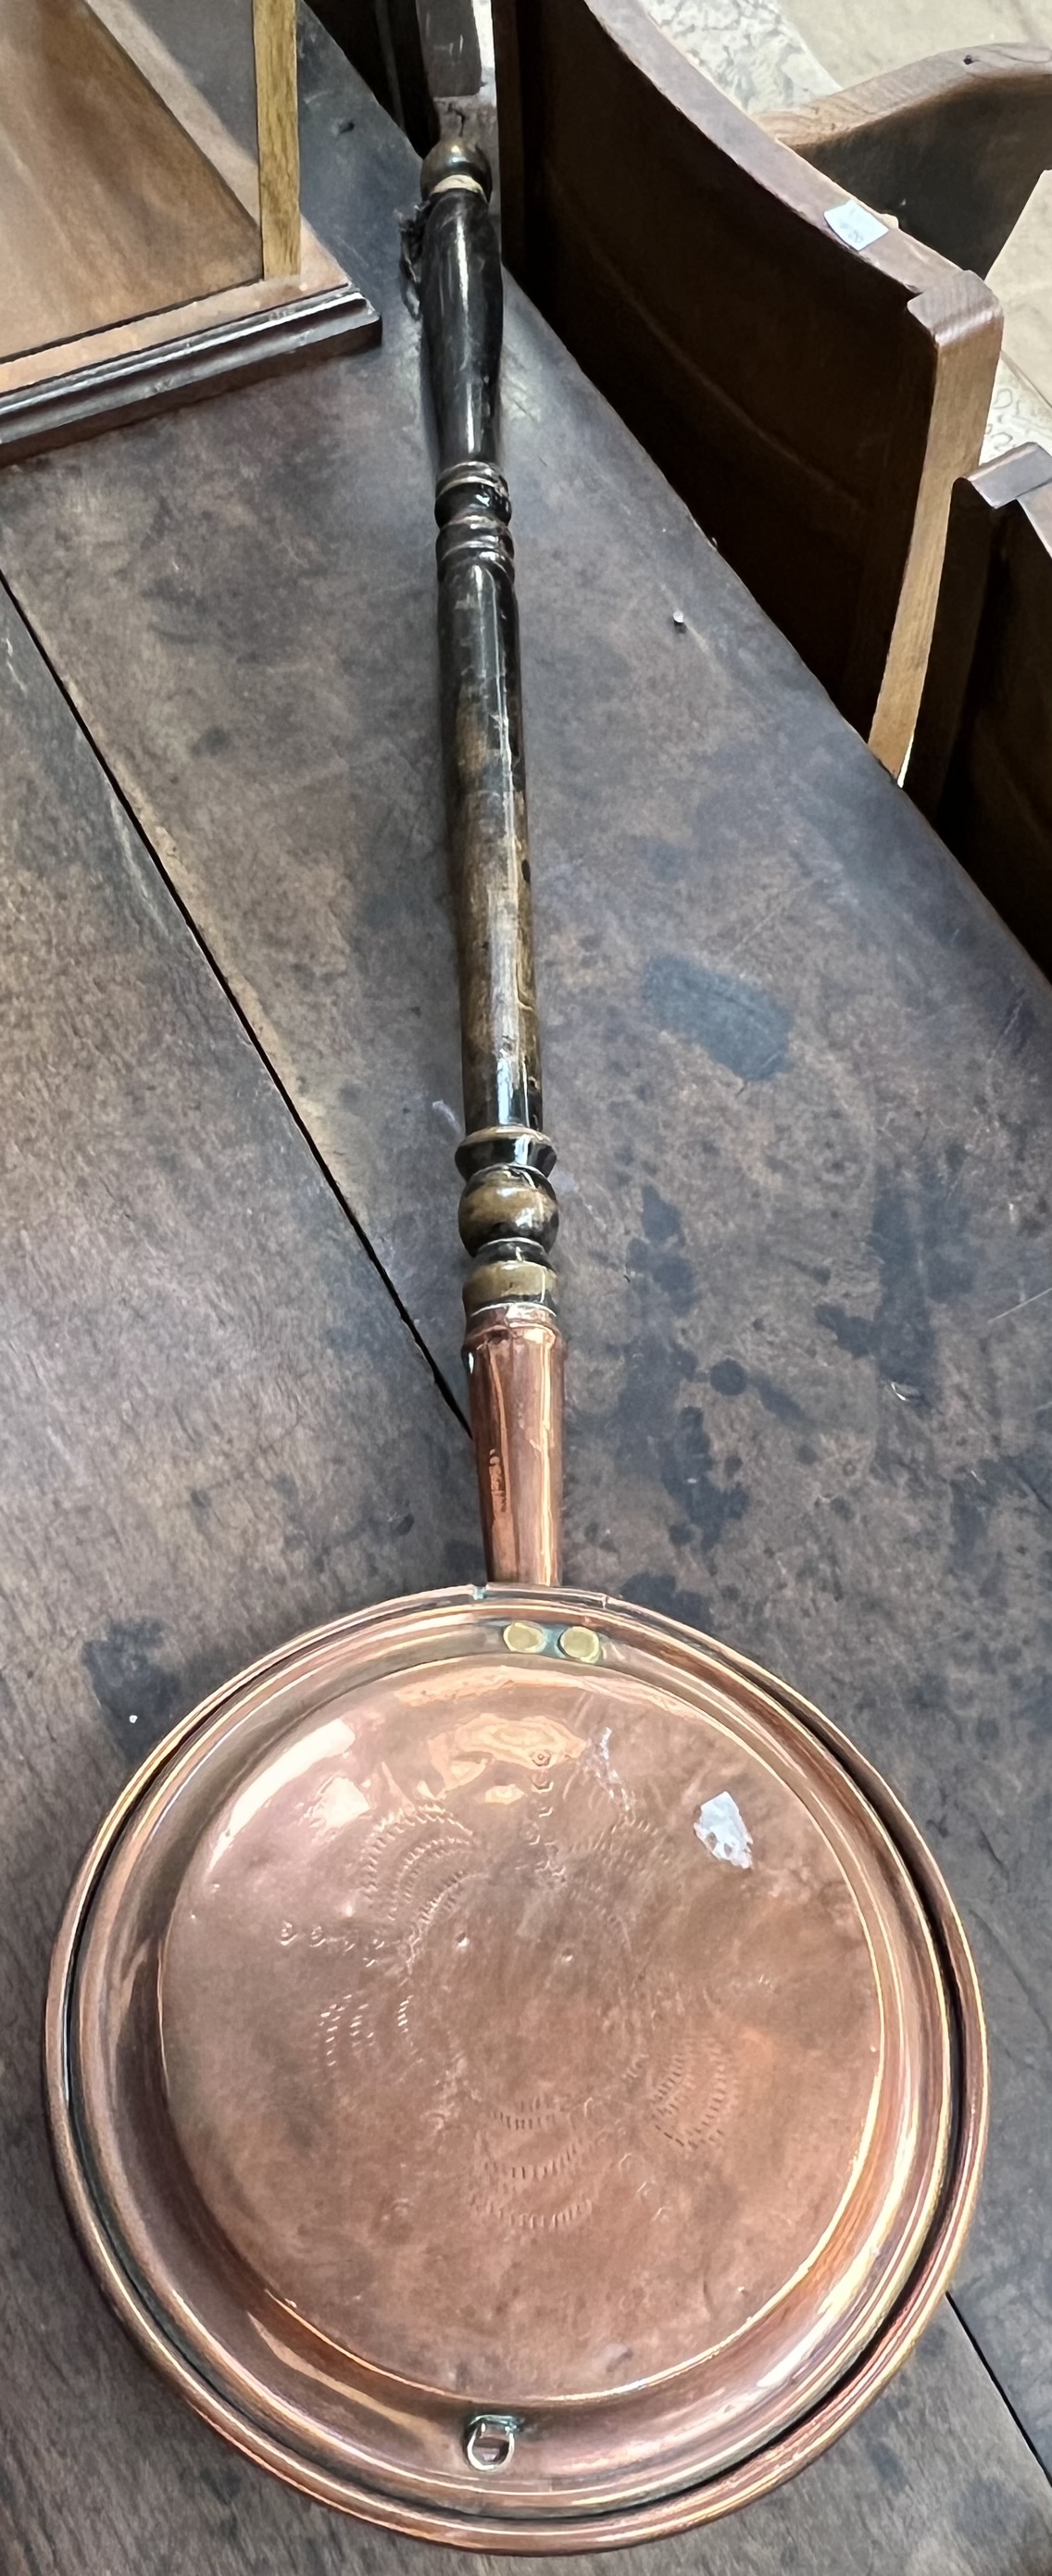 A copper bedwarming pan on a turned handle